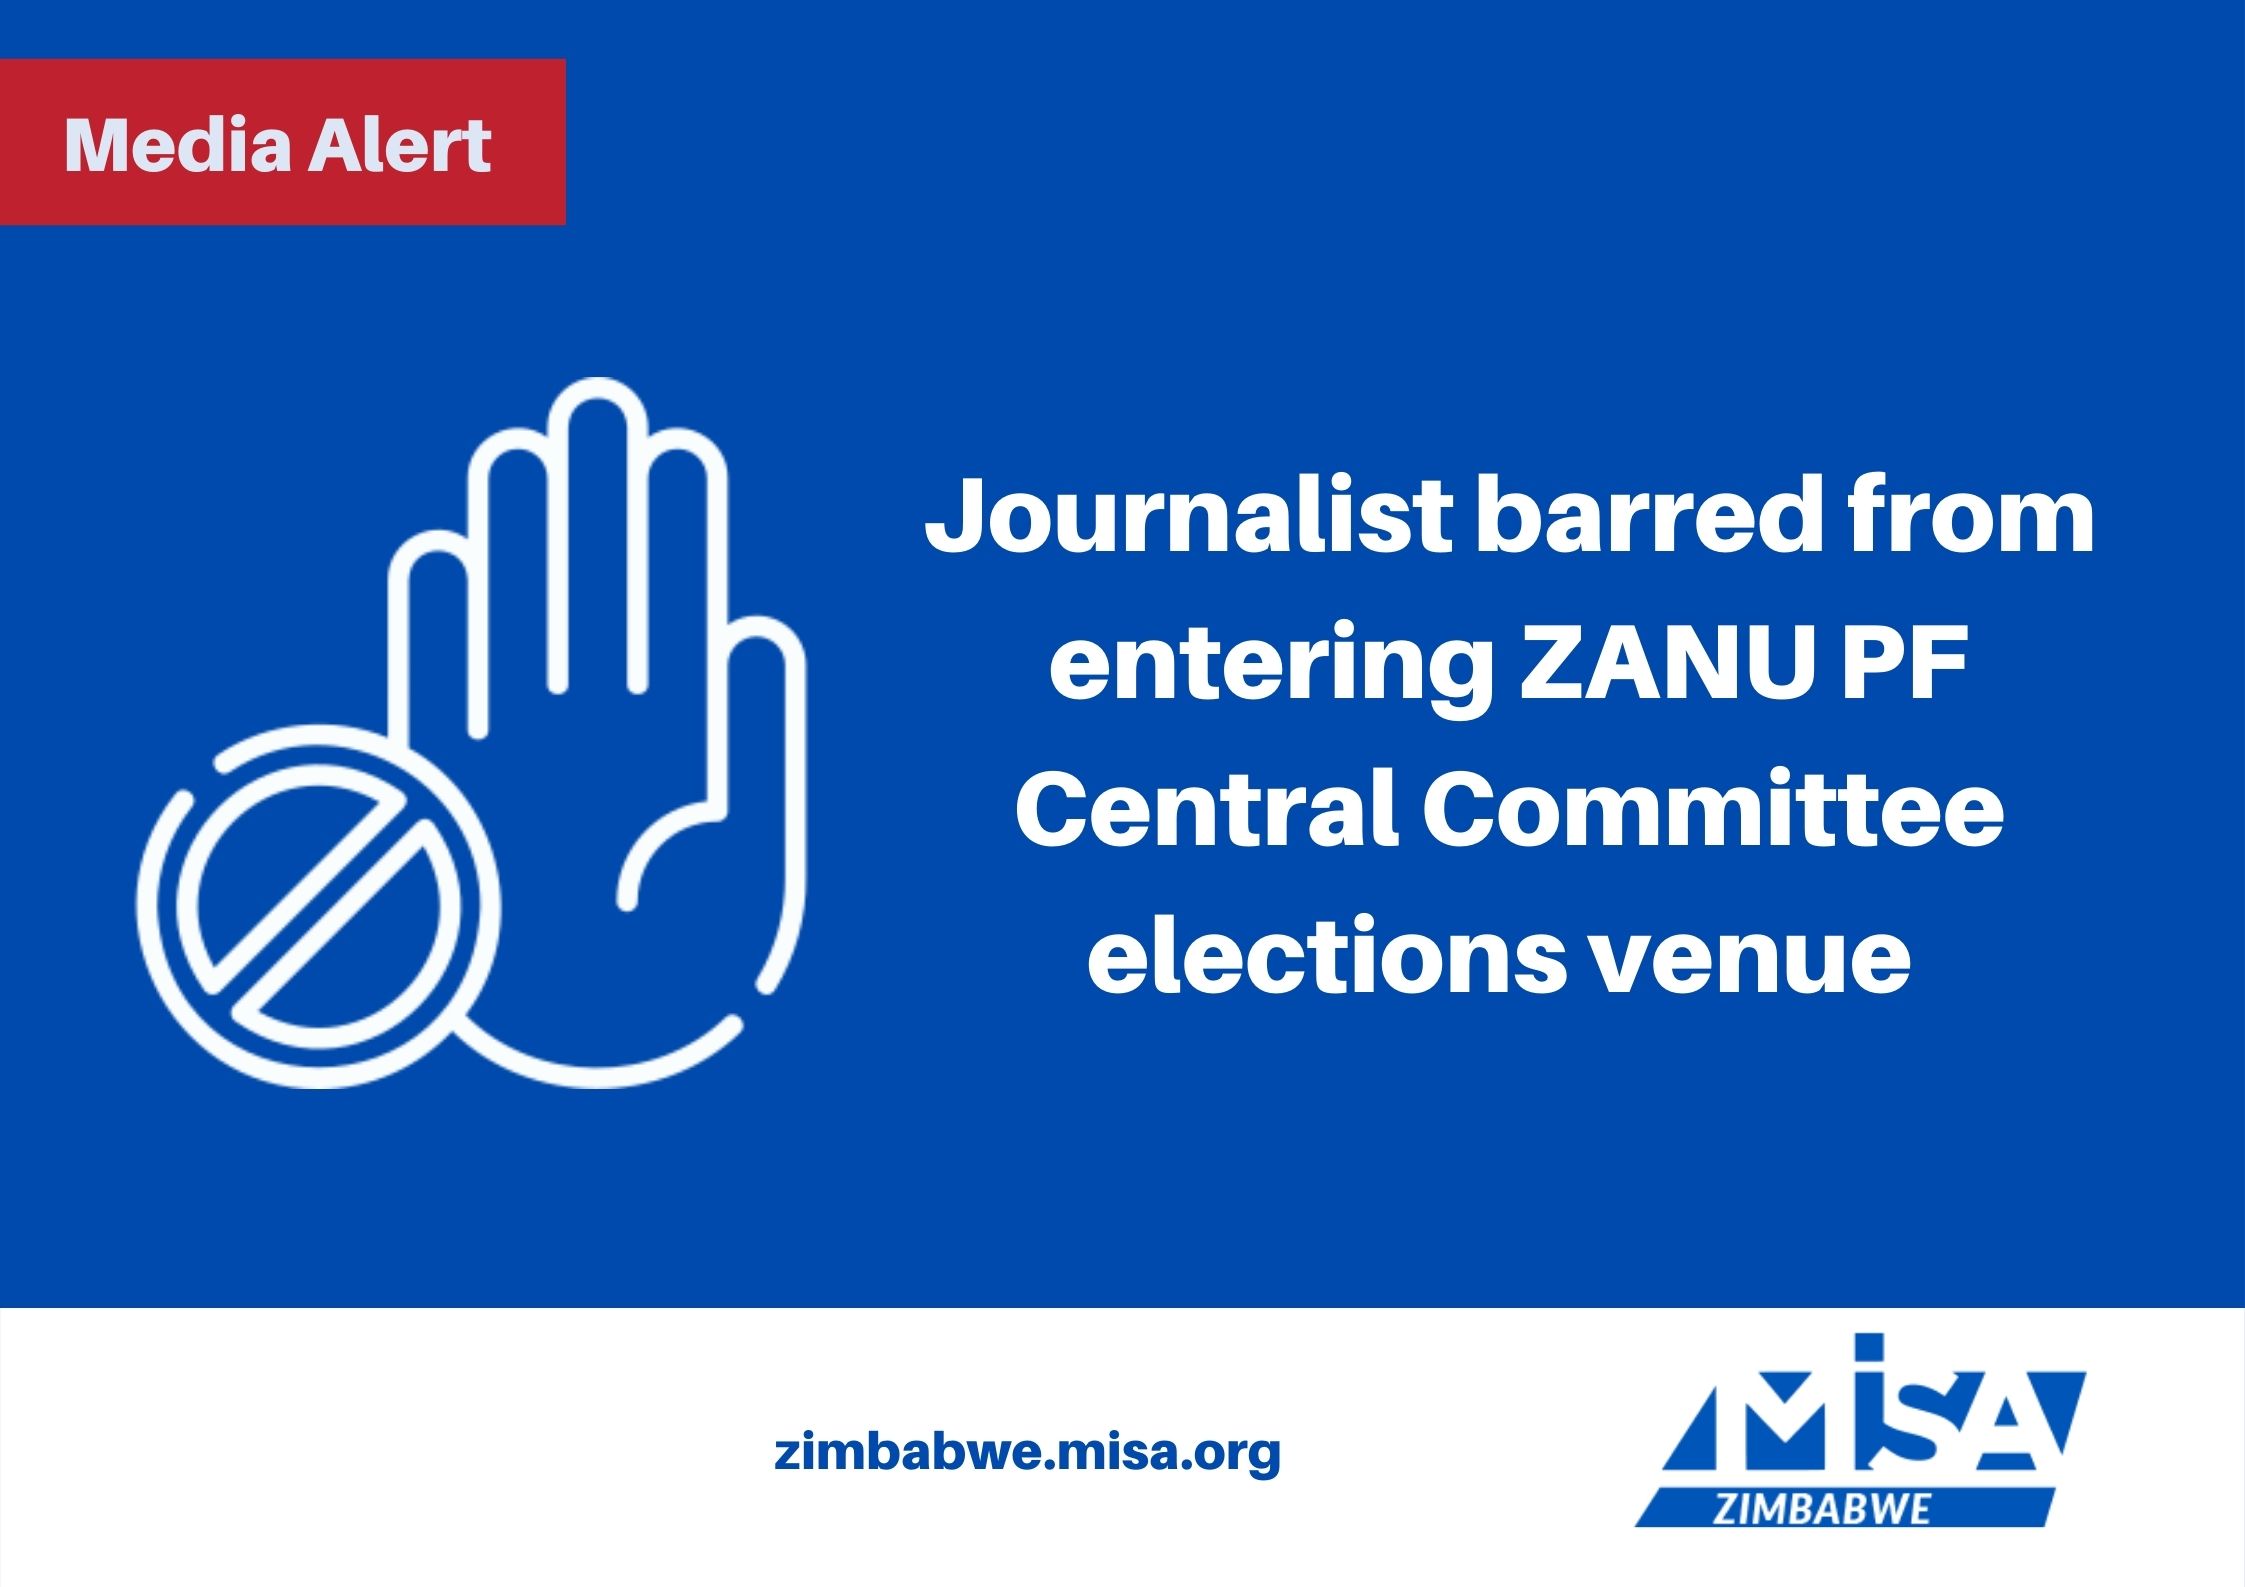 Journalist barred from entering ZANU PF Central Committee elections venue